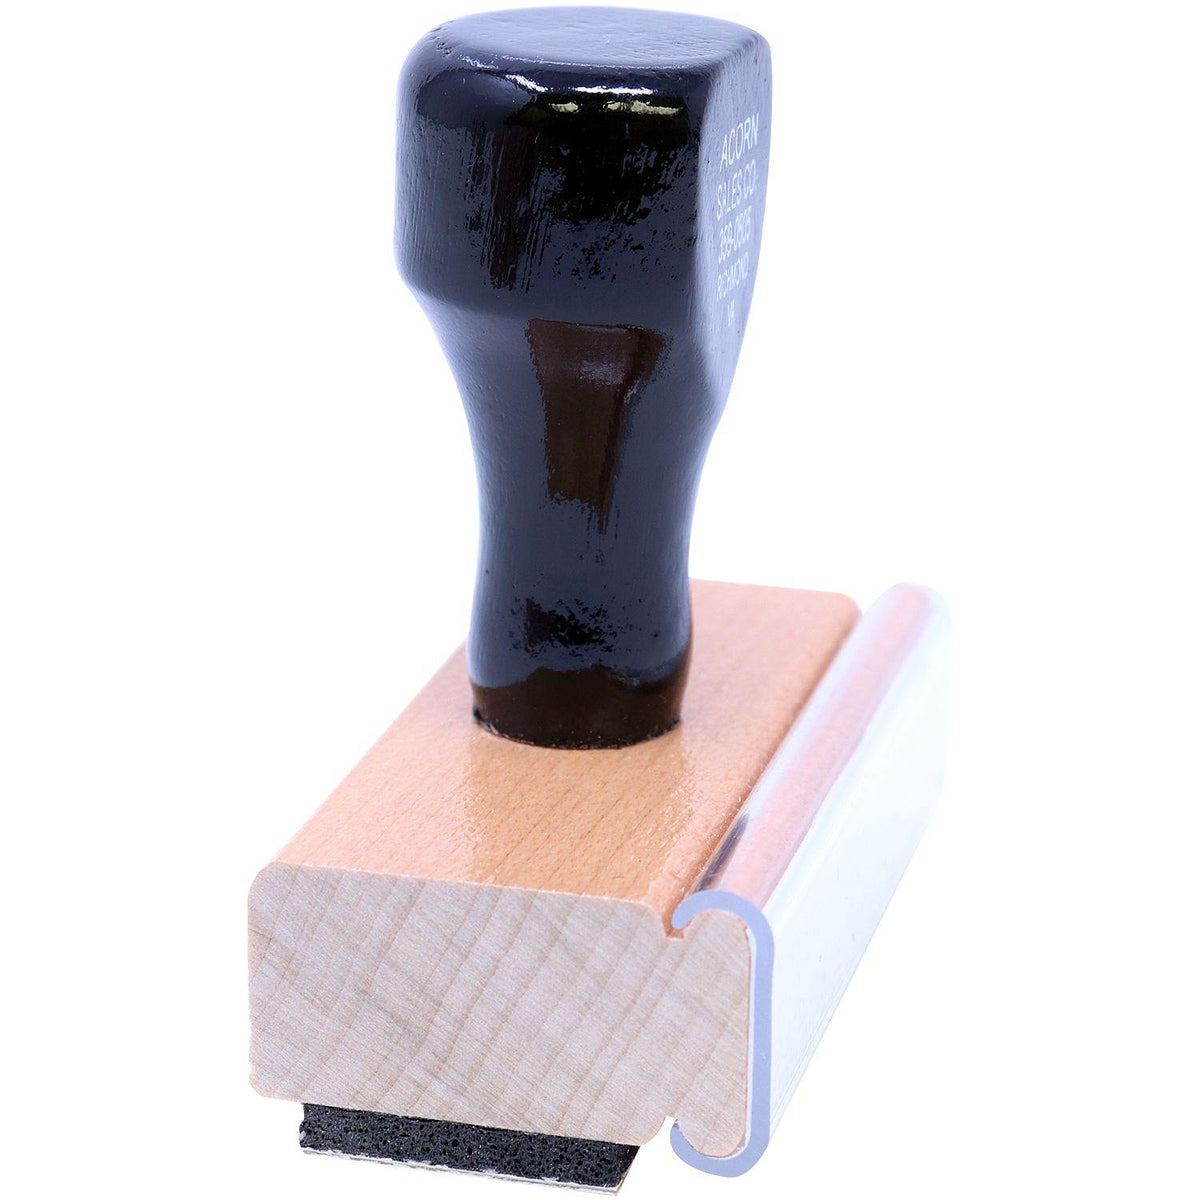 Large X-Rays Rubber Stamp - Engineer Seal Stamps - Brand_Acorn, Impression Size_Large, Stamp Type_Regular Stamp, Type of Use_Medical Office